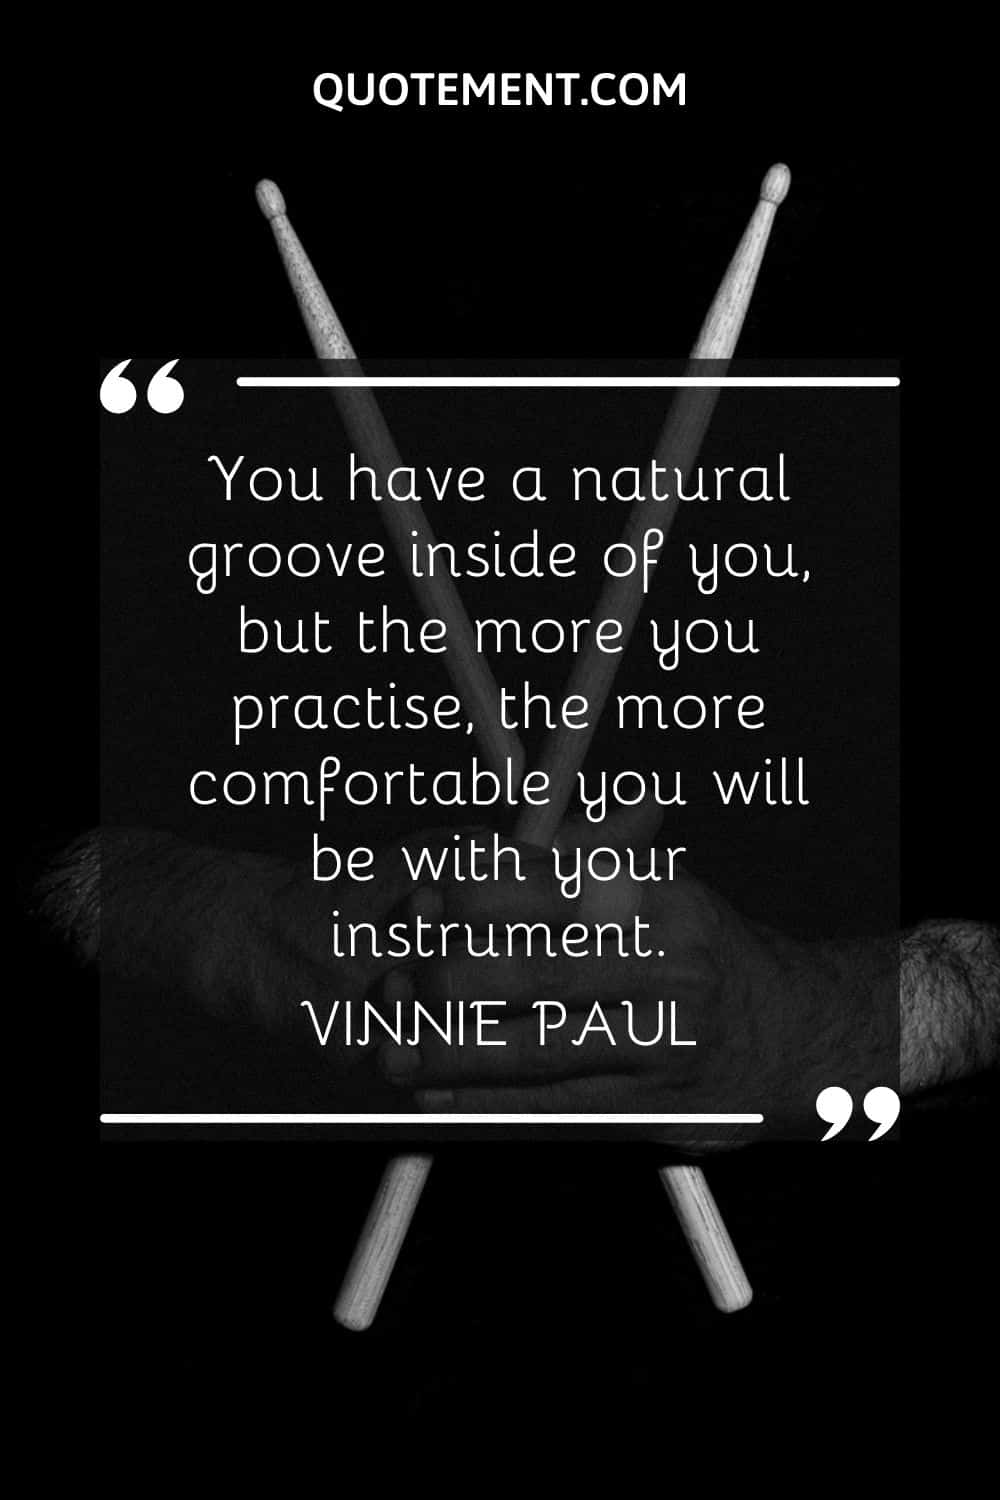 You have a natural groove inside of you, but the more you practise, the more comfortable you will be with your instrument